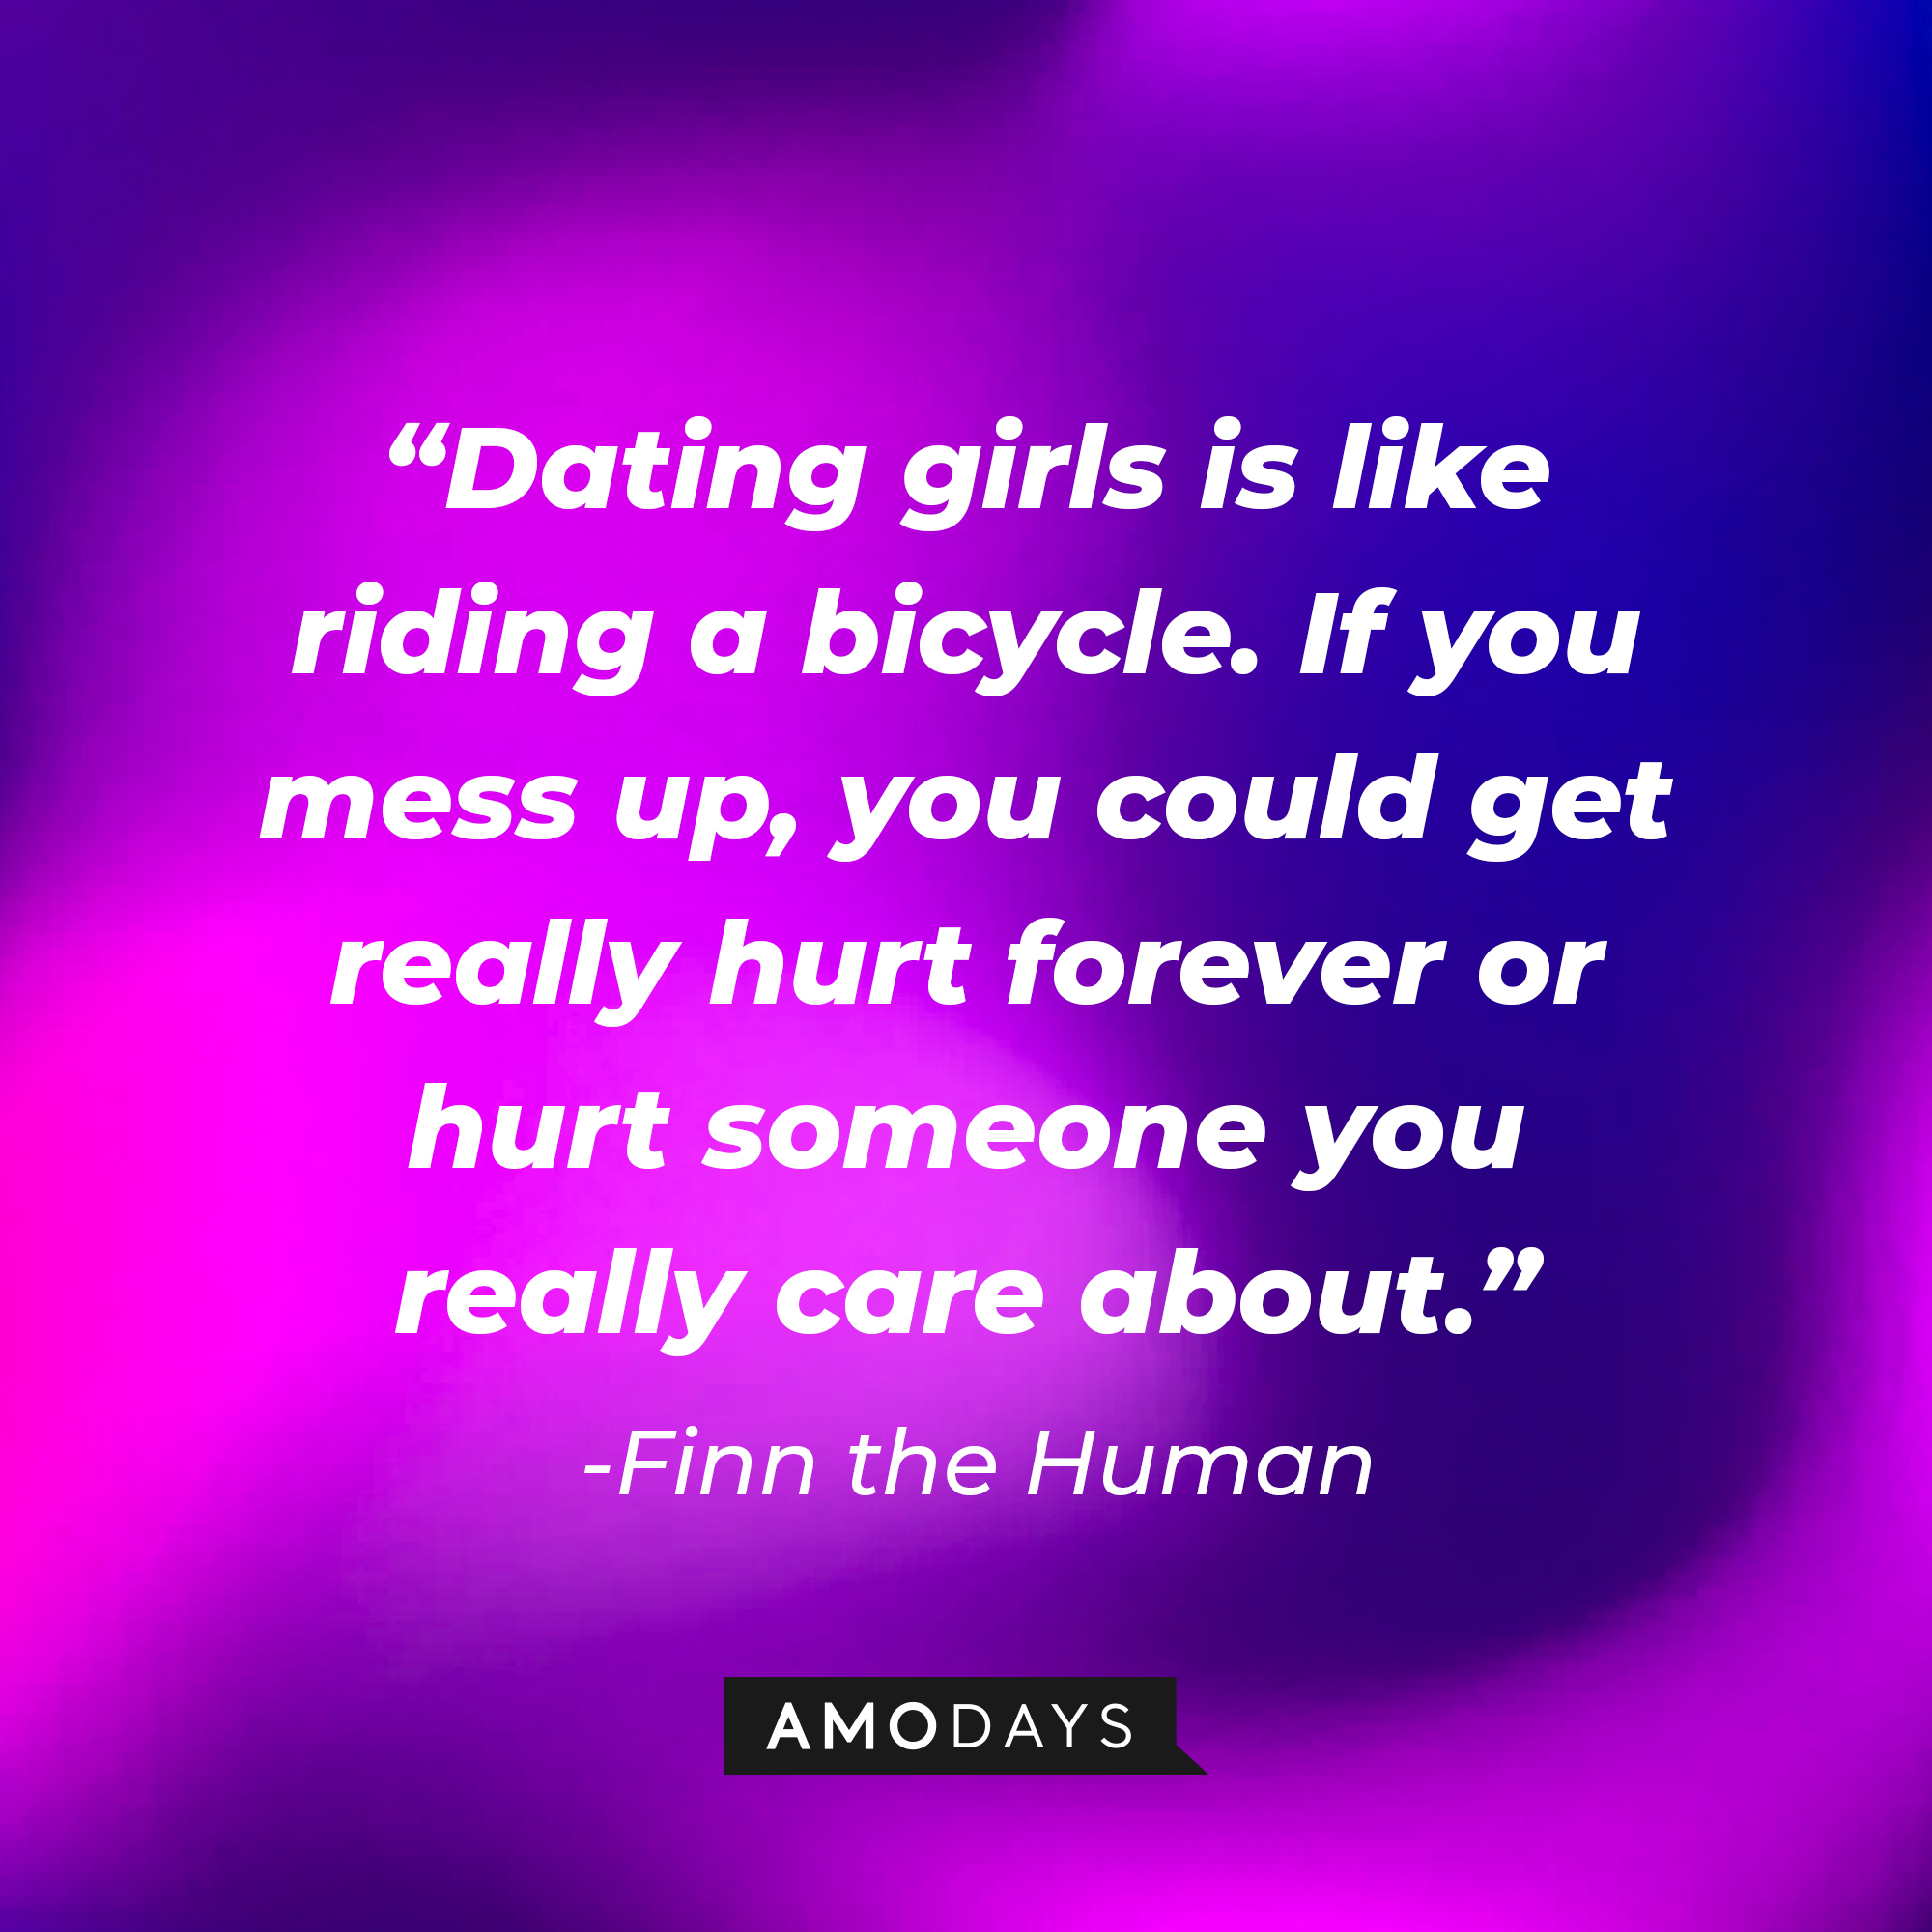 Finn the Human’s quote: “Dating girls is like riding a bicycle. If you mess up, you could get really hurt forever or hurt someone you really care about.” | Source: AmoDays